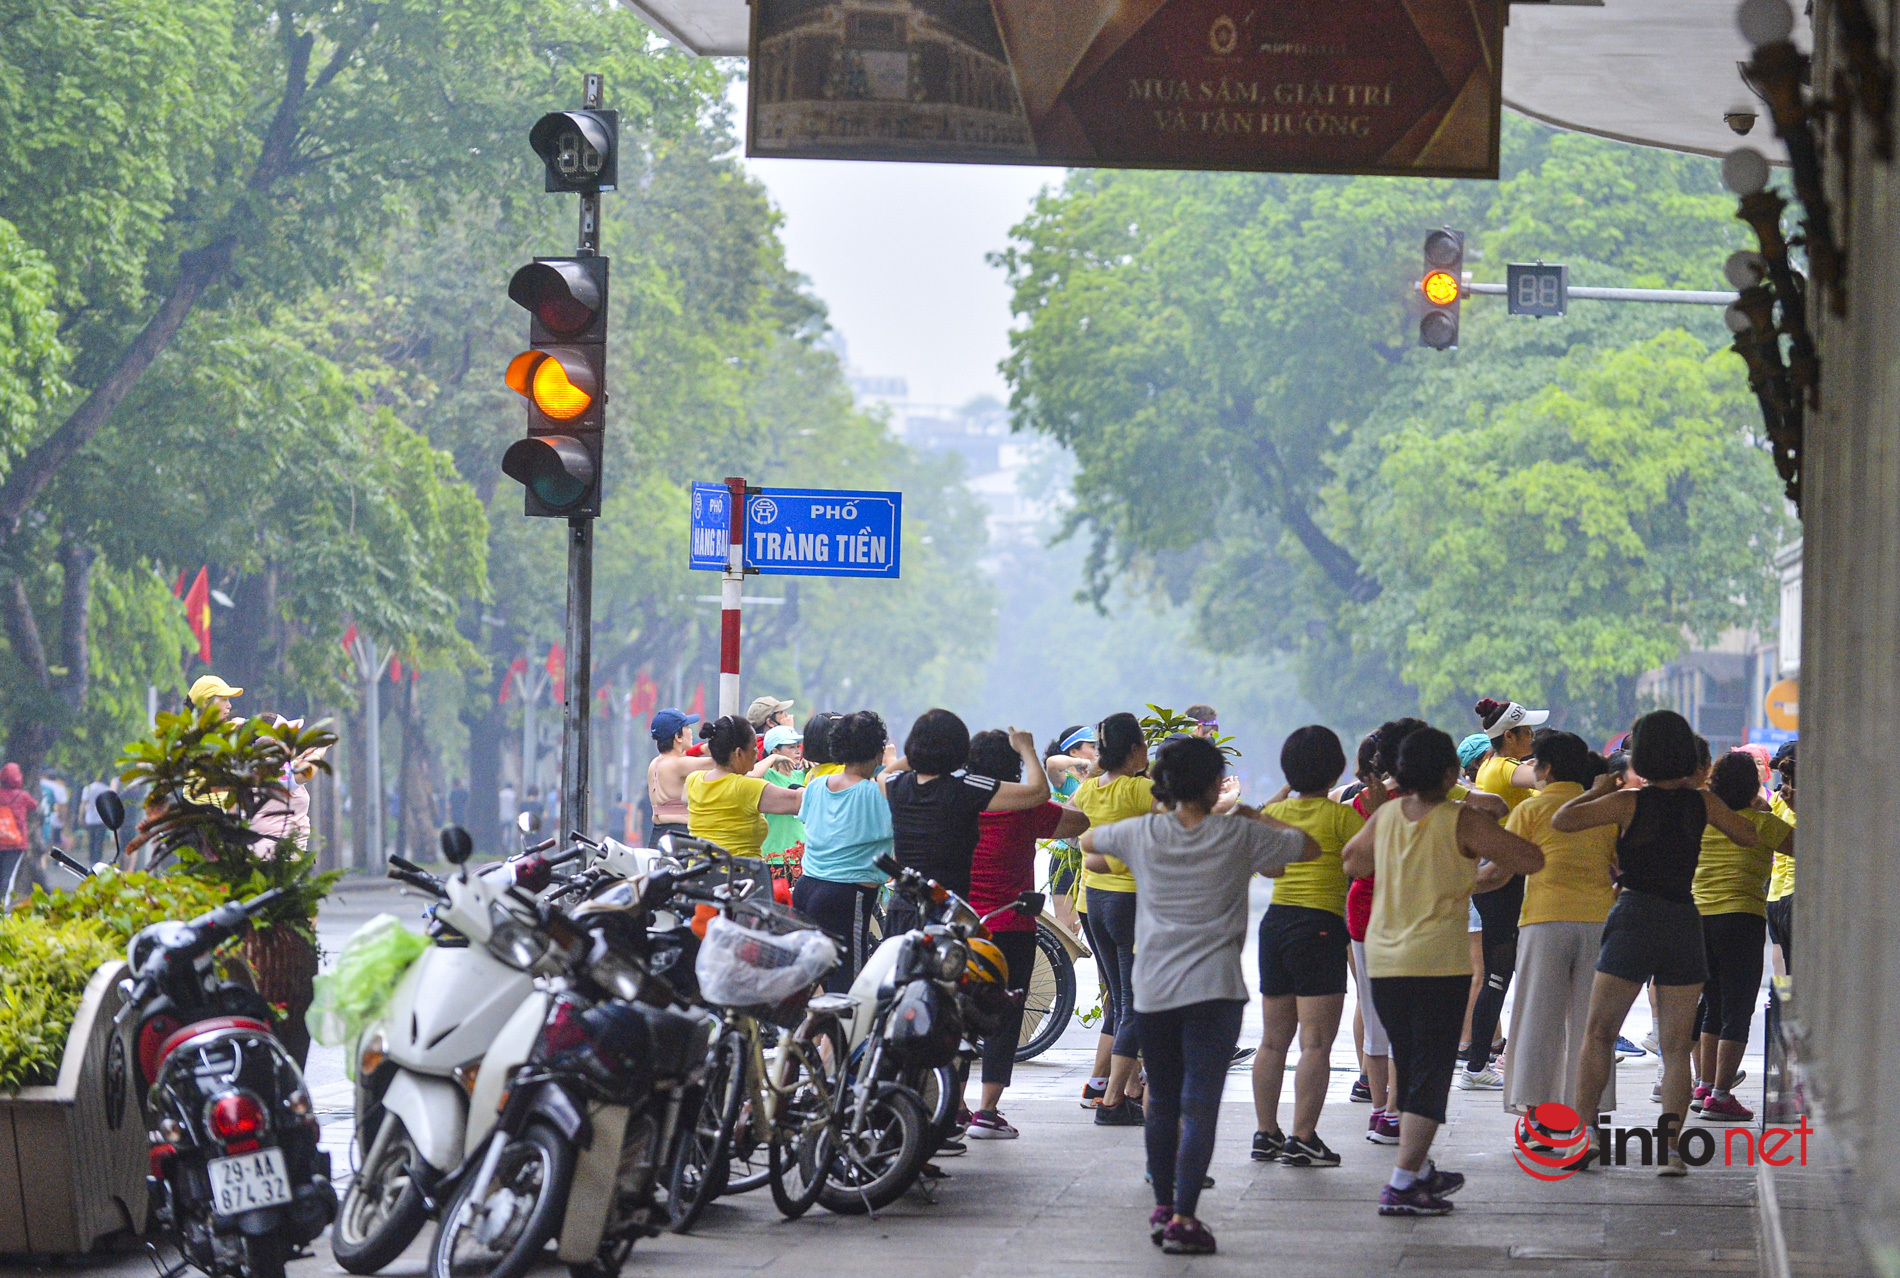 On the first day, the 'bicycle racetrack' was cleared, speakers pulled, people walked dogs into Ho Guom walking street